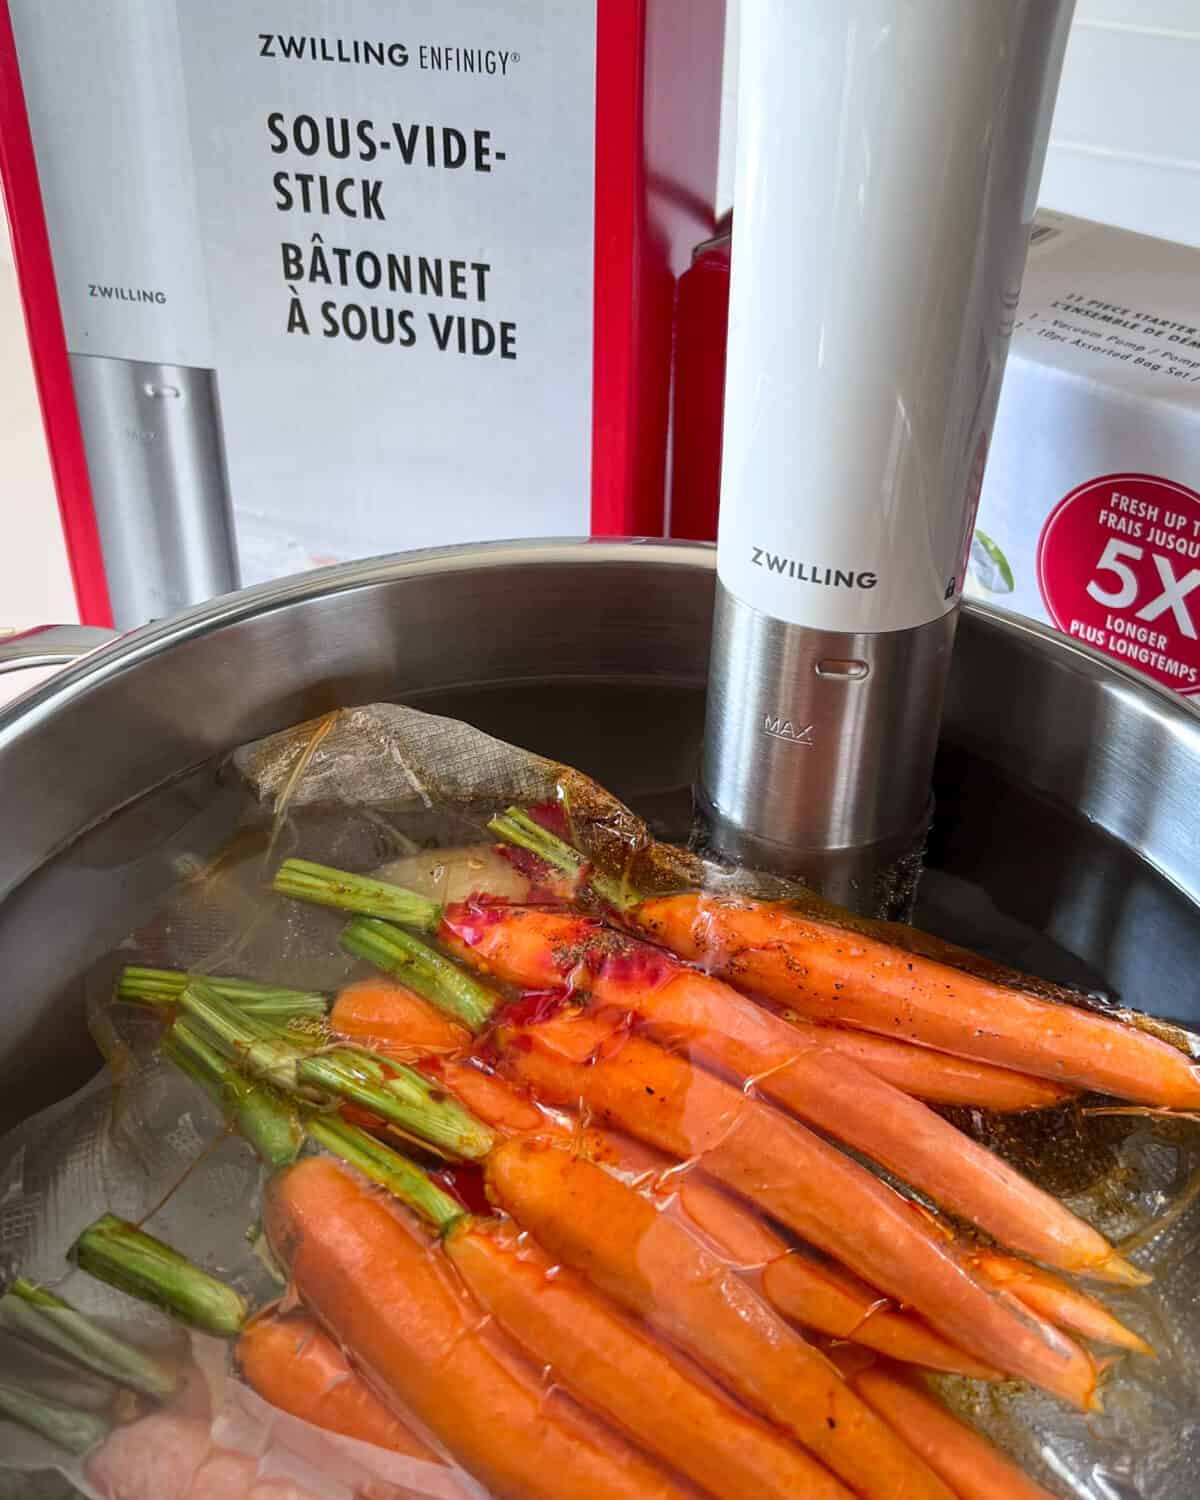 A vacuumed sealed bag of carrots in a water bath.